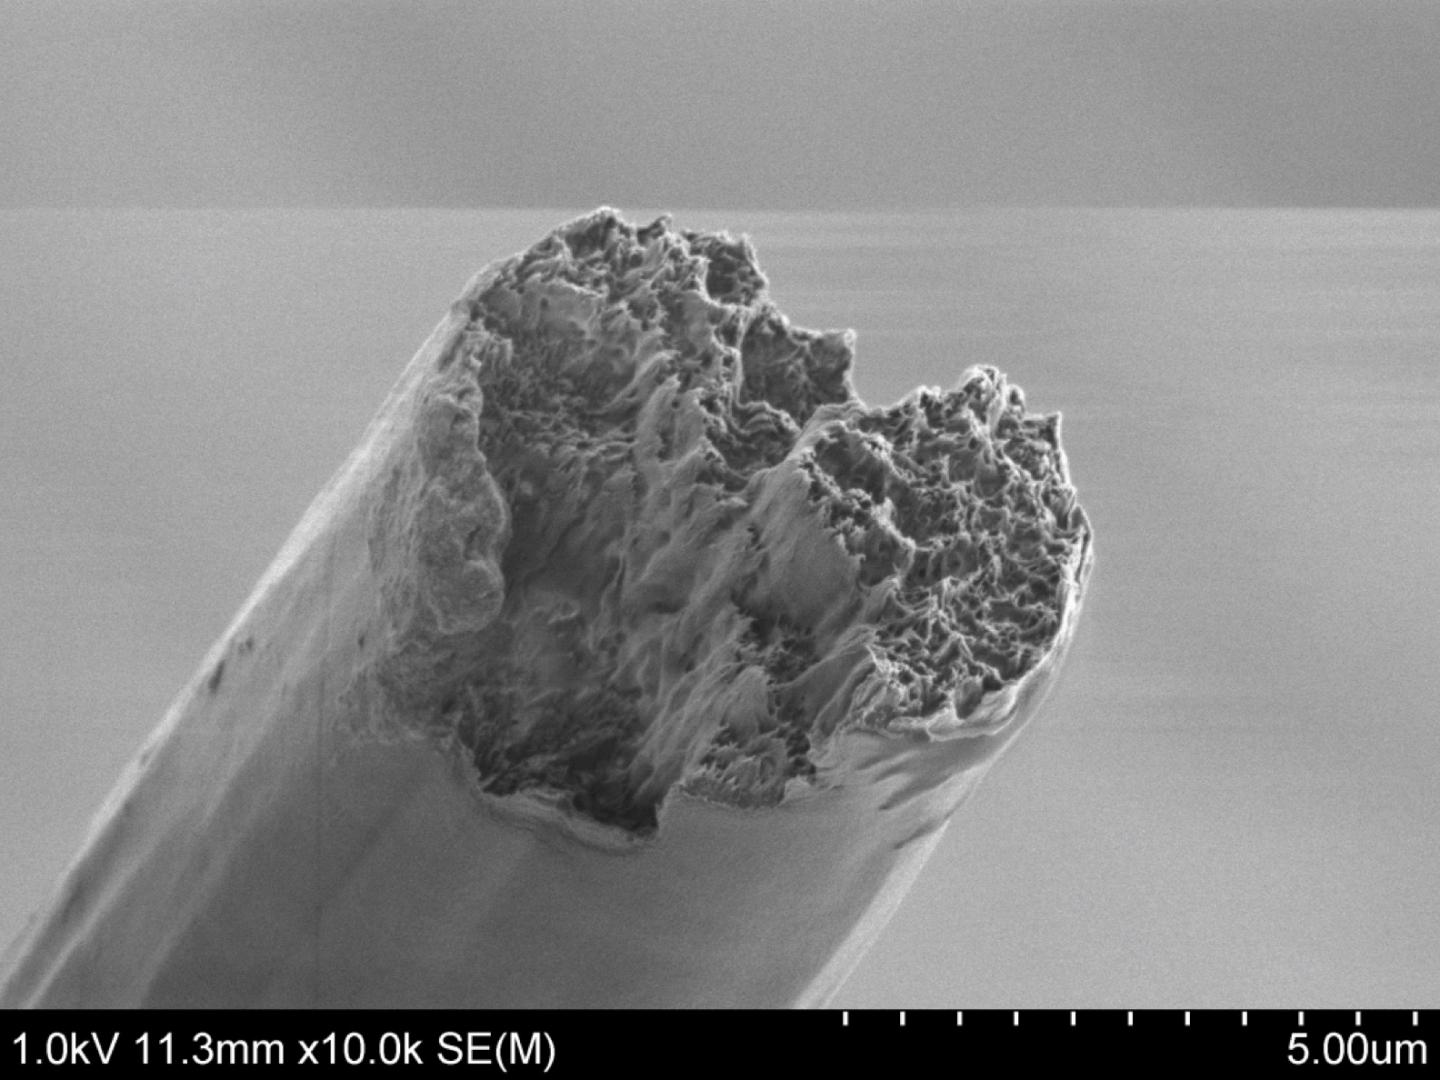 World's Strongest Bio-Material Outperforms Steel and Spider Silk